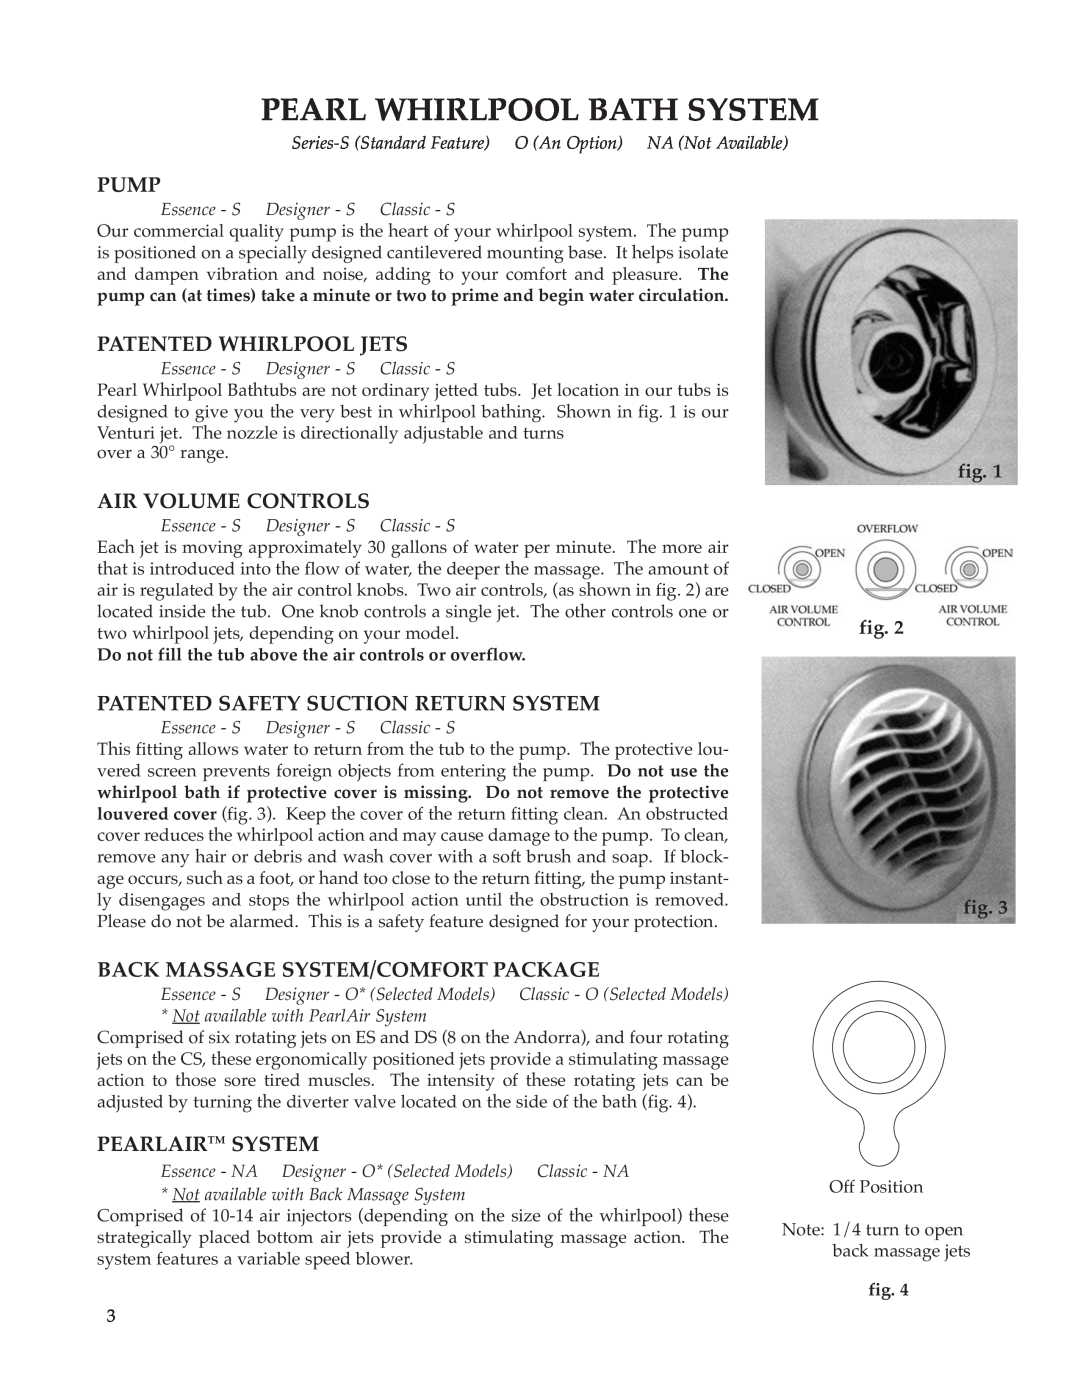 Whirlpool Hot Tub owner manual Pump, Patented Whirlpool Jets, Air Volume Controls, Patented Safety Suction Return System 